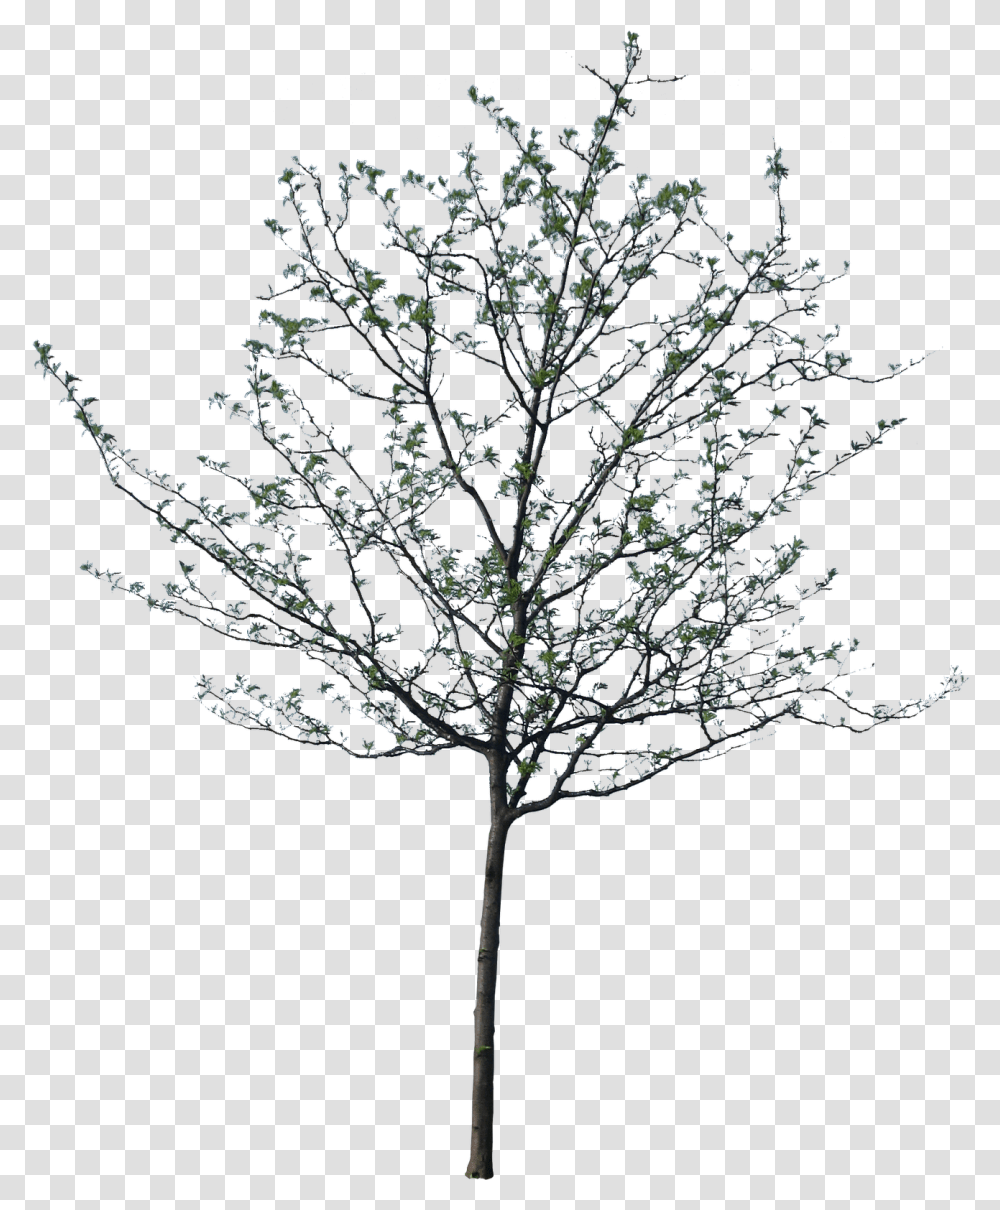 Clip Art Architectural Trees Black Trees For Photoshop, Plant, Cross, Outdoors, Nature Transparent Png